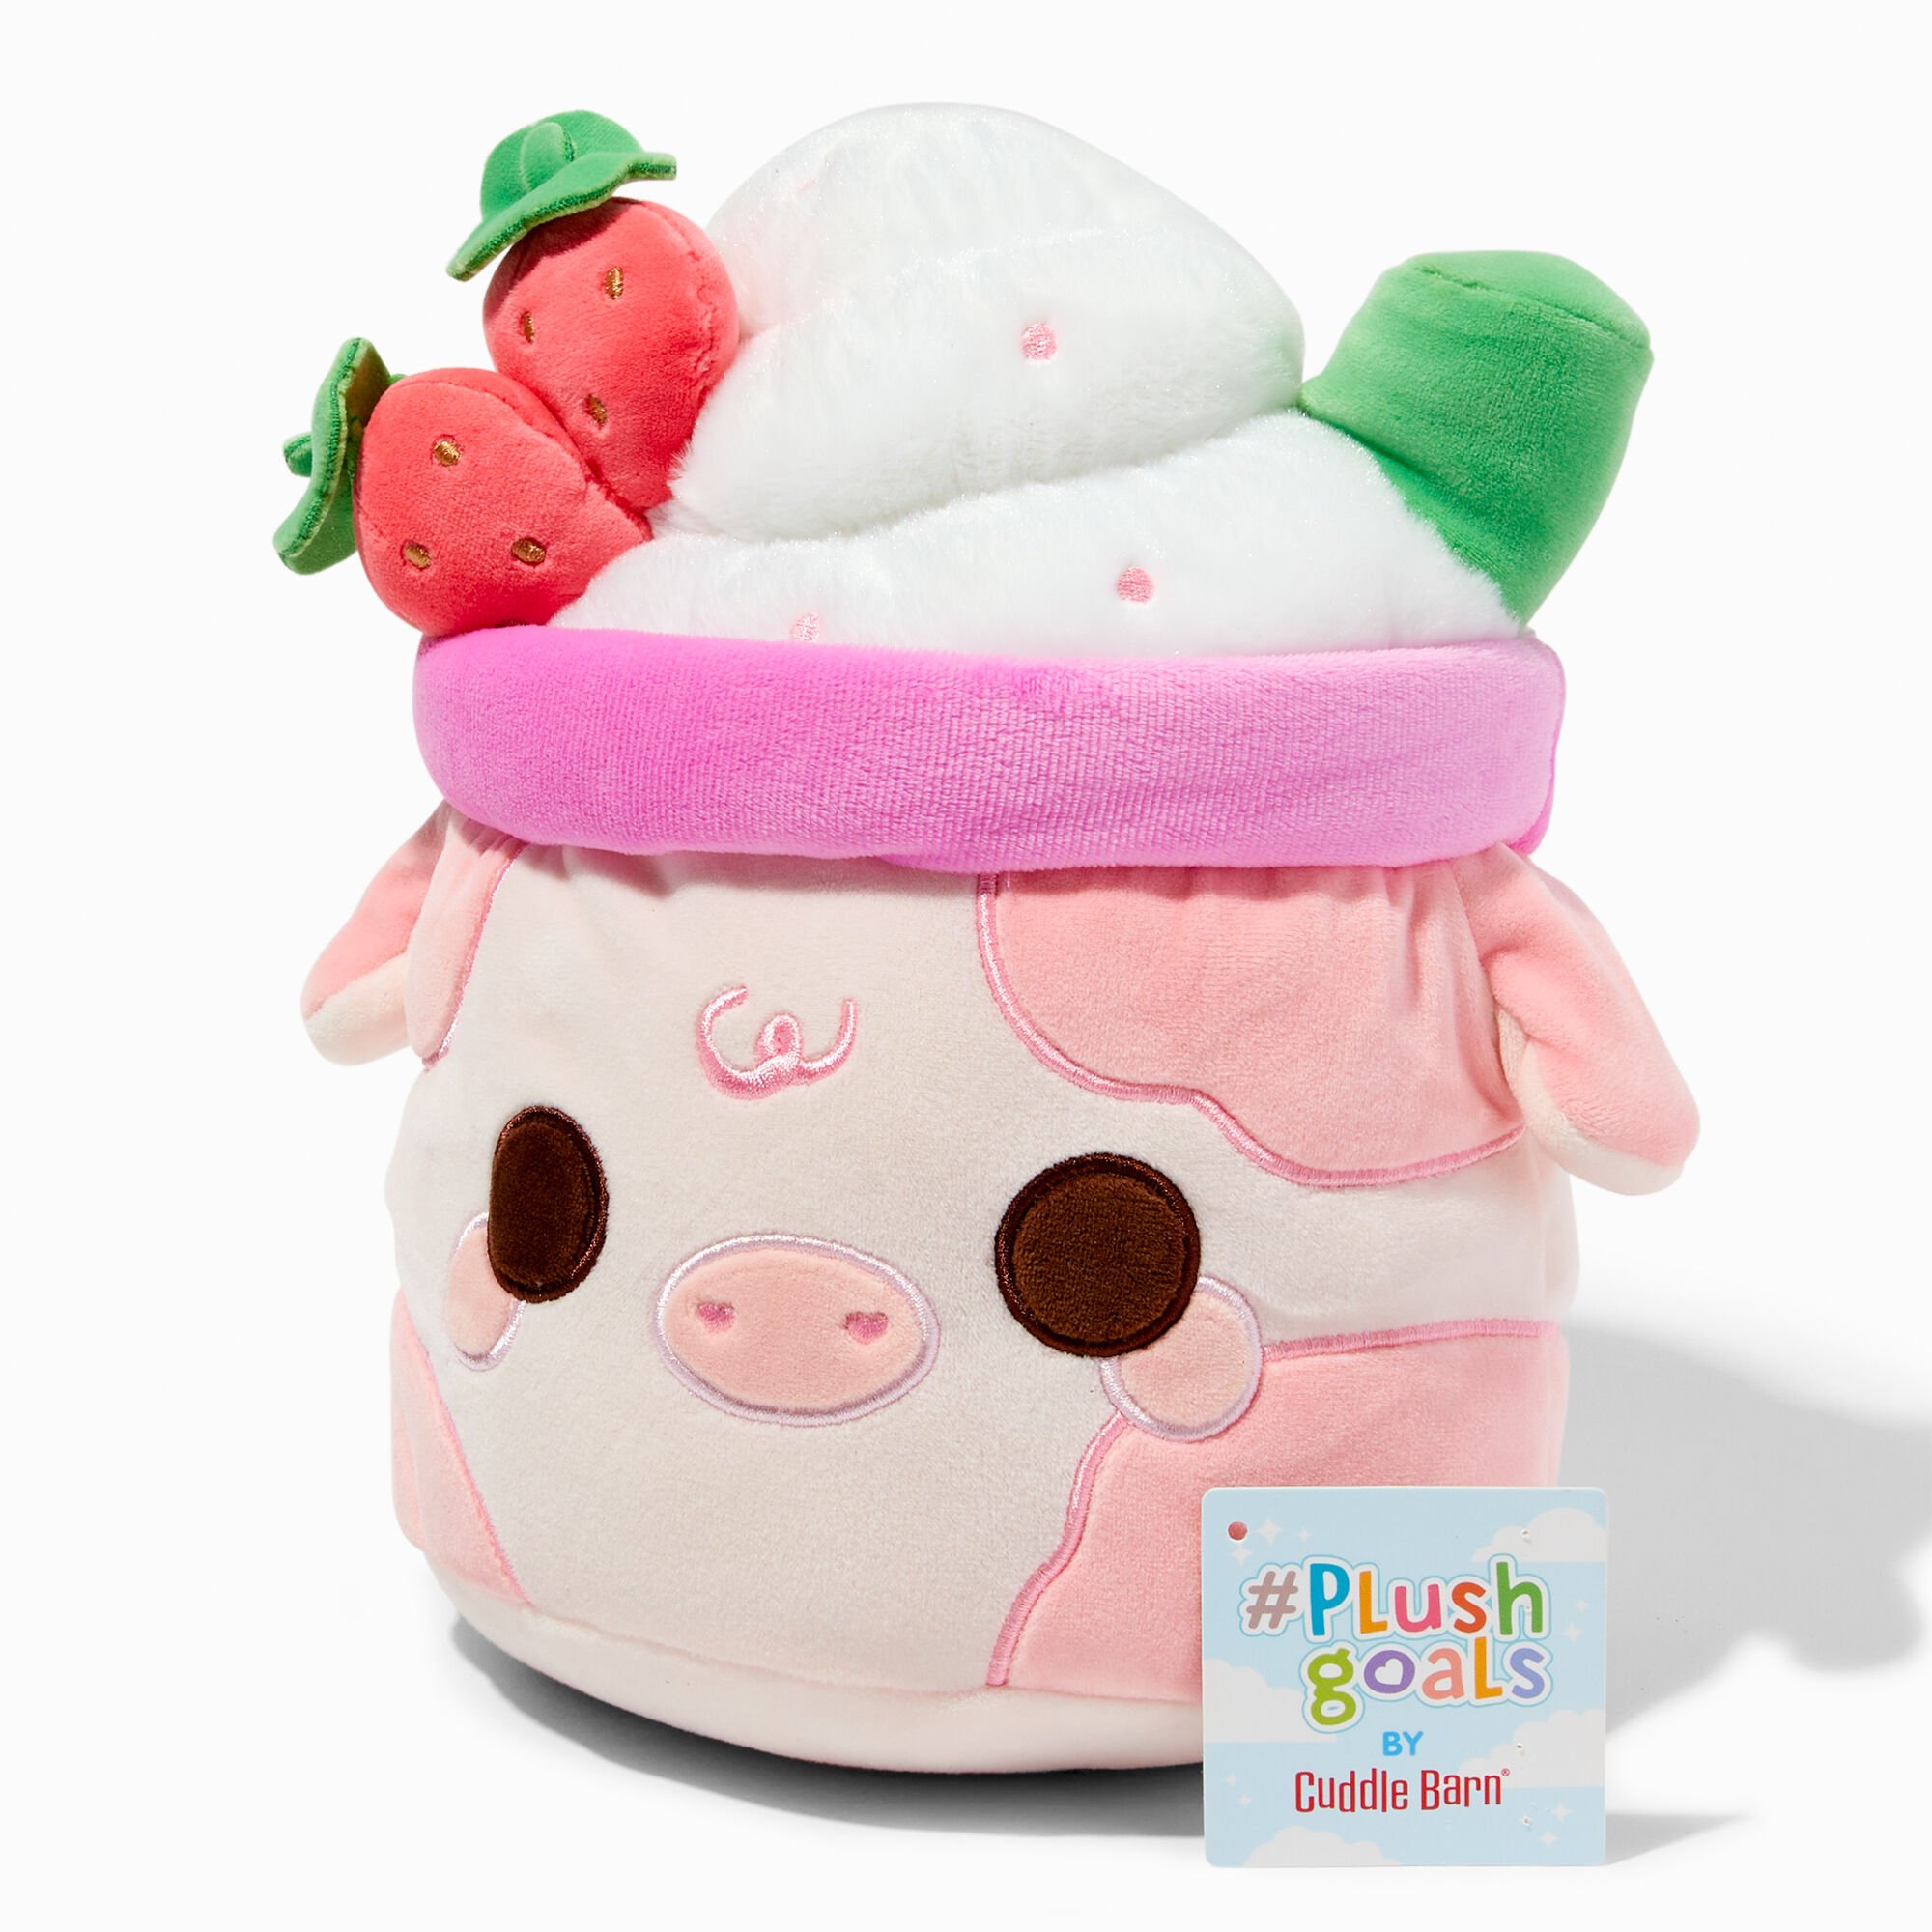 View Claires plush Goals By Cuddle Barn 9 Strawberry Mooshake Plush Toy information